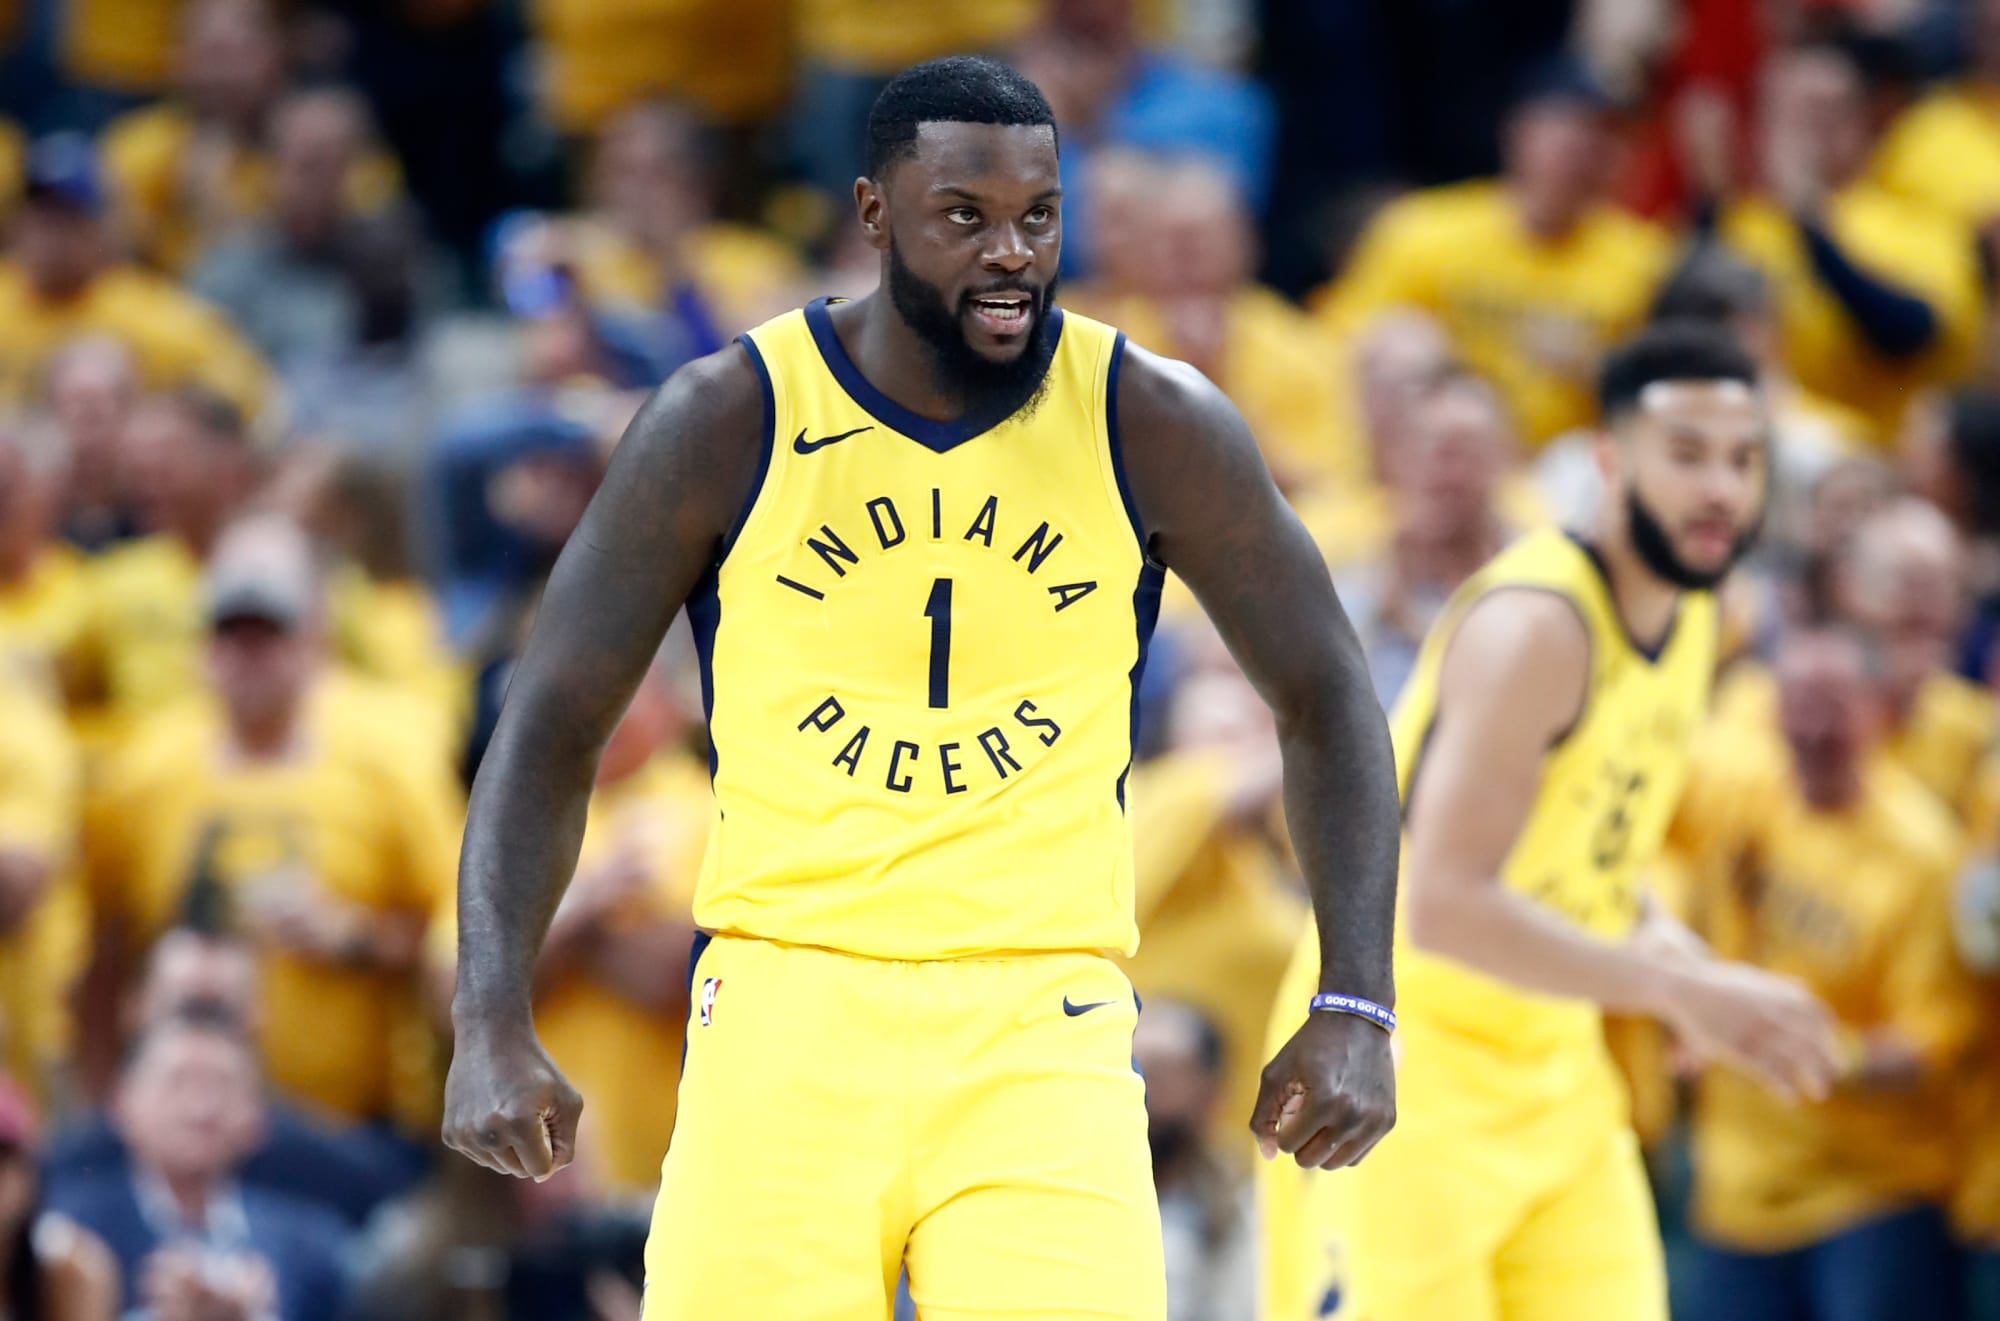 Lance Stephenson saved the Pacers and caused a fight in the same game 